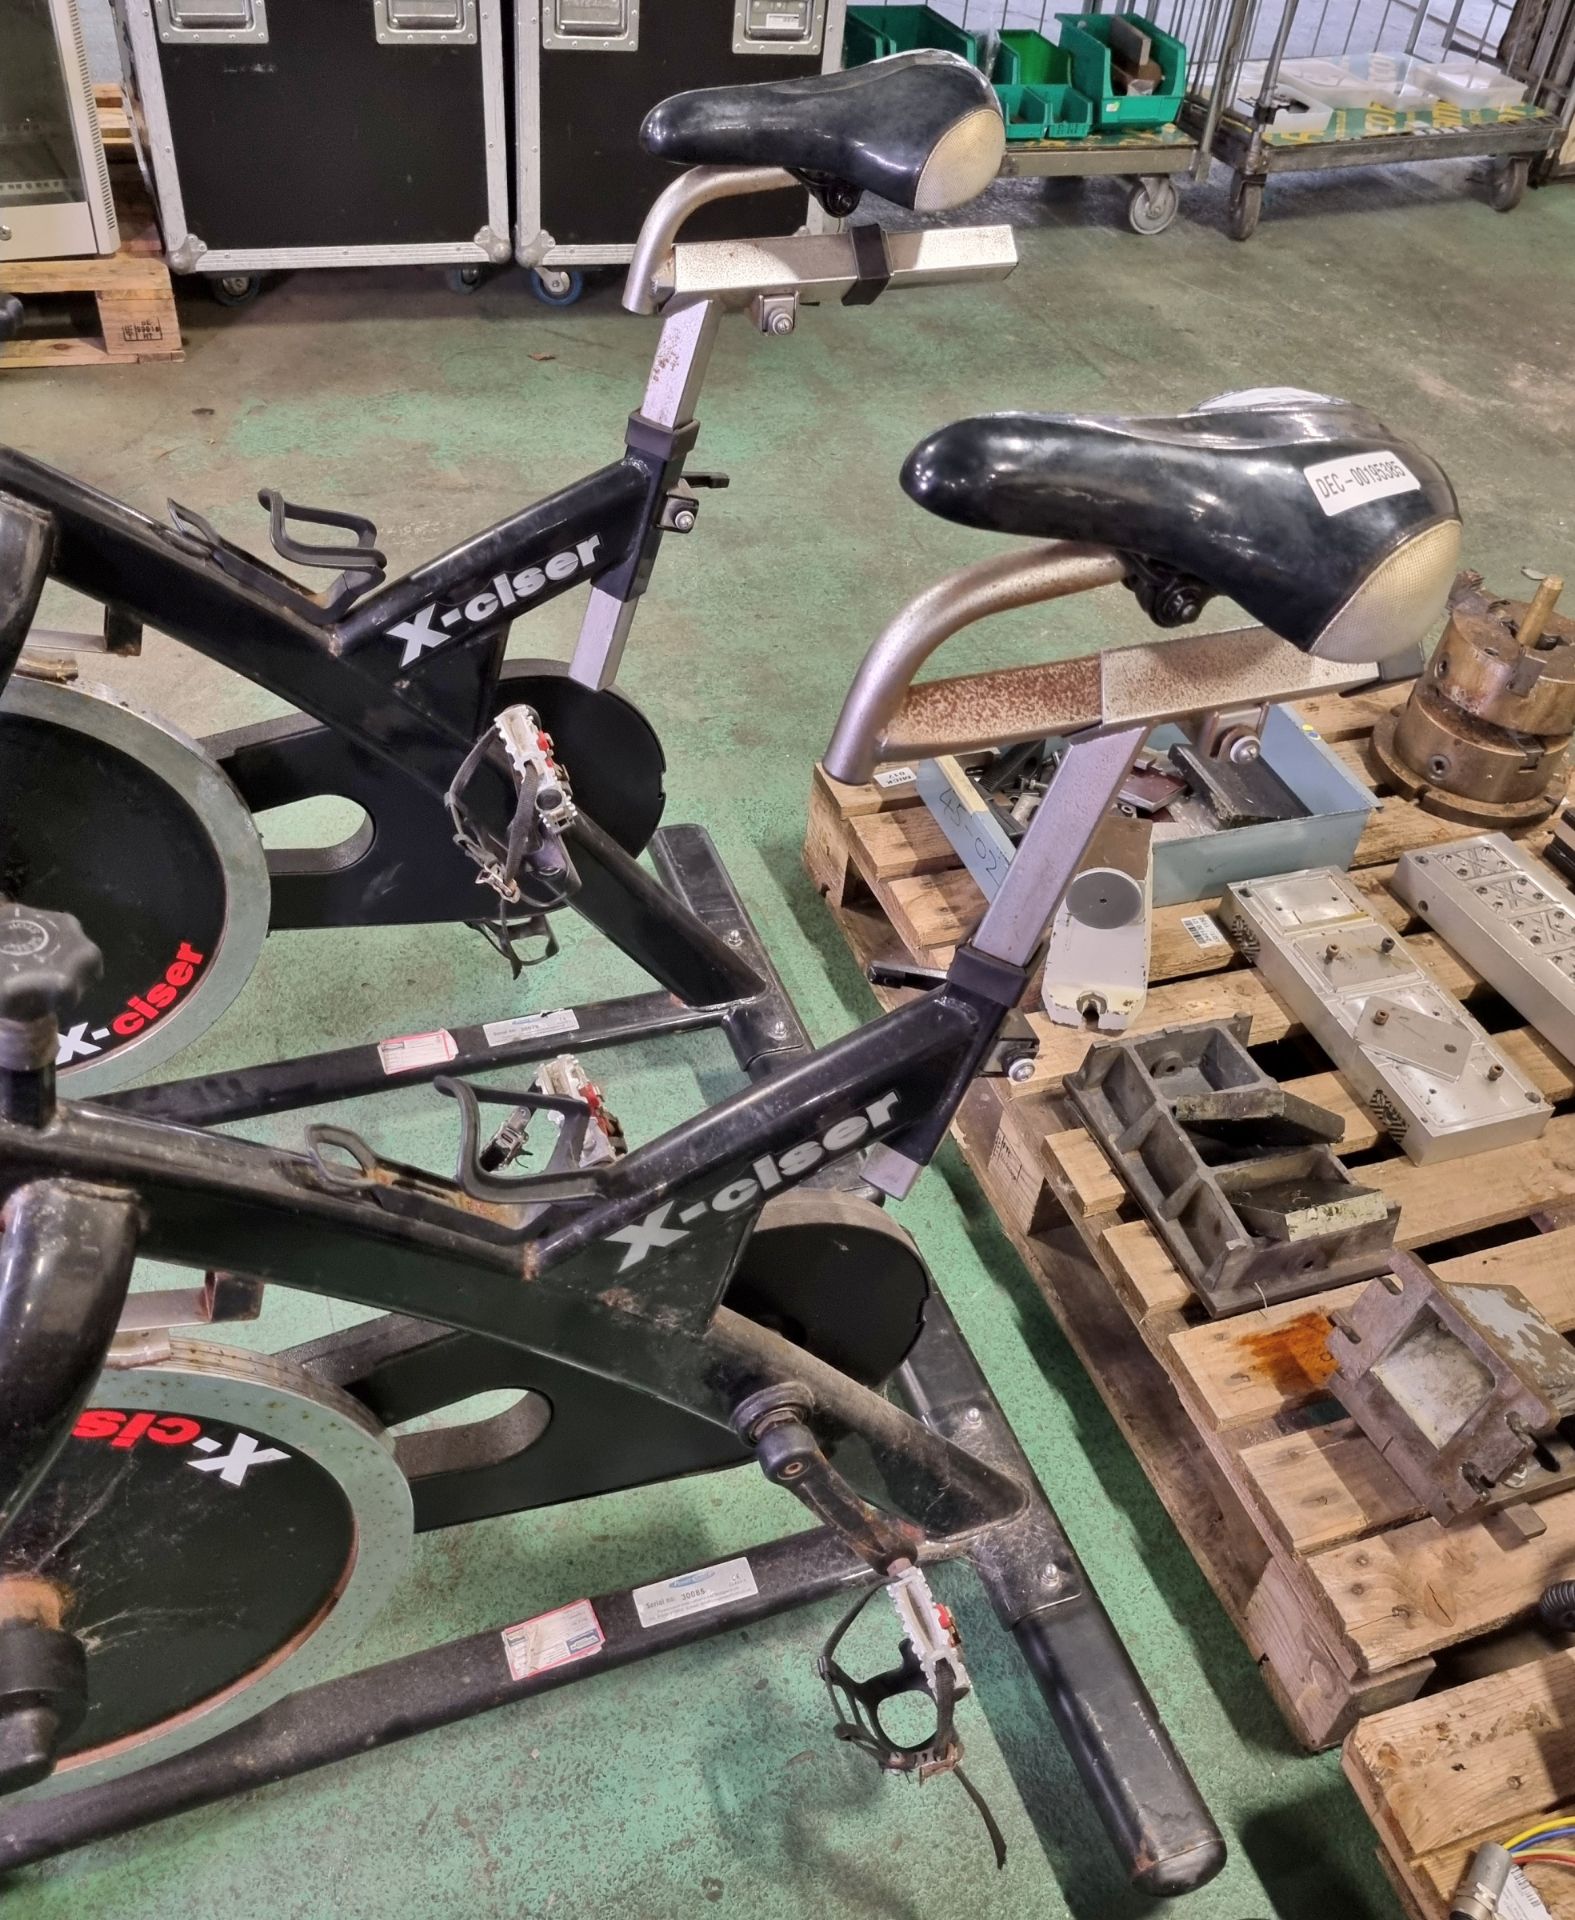 3x Higol X-ciser spin bikes - mould on handlebars - W 1030 x D 630 x H 1210 mm - Image 9 of 14